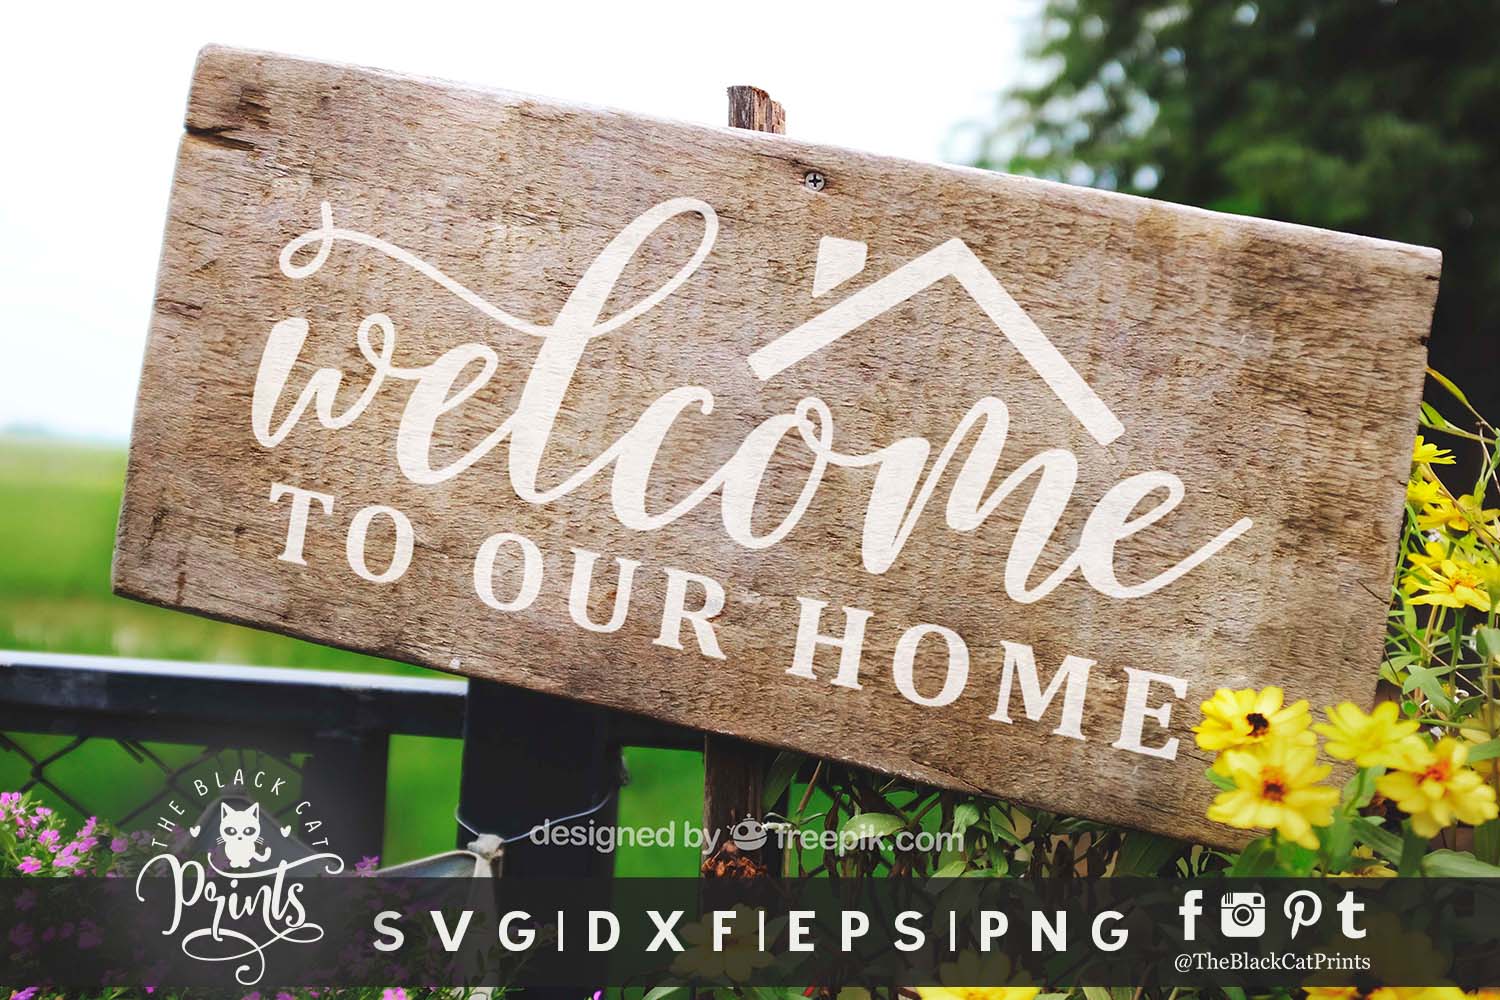 Welcome To Our Home SVG DXF EPS PNG Family door sign making